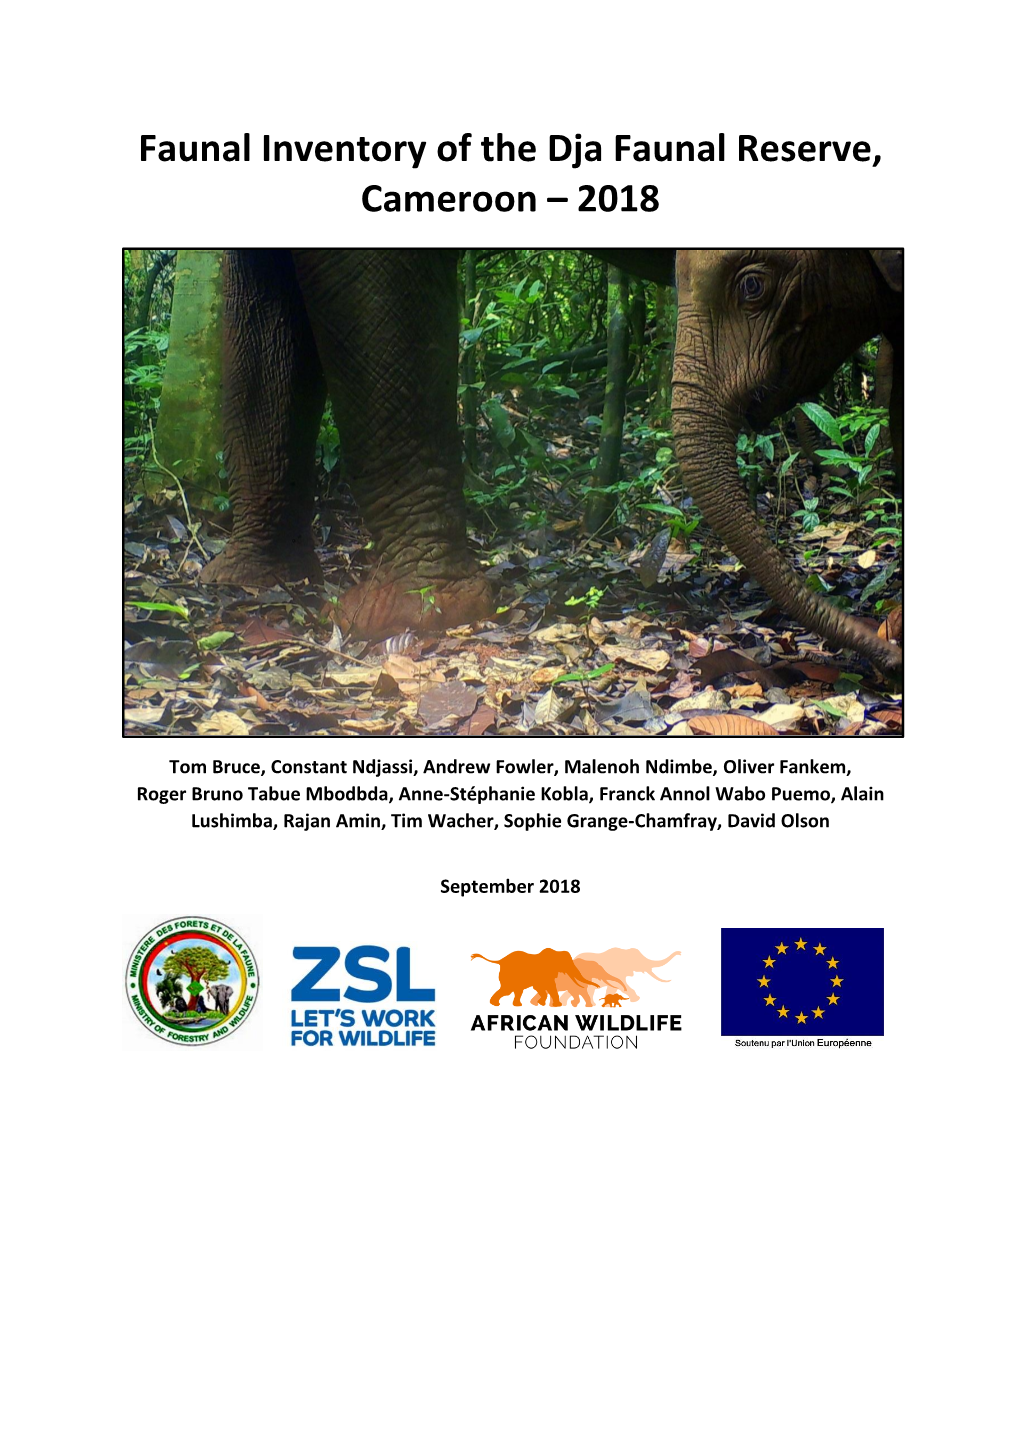 Faunal Inventory of the Dja Faunal Reserve, Cameroon – 2018